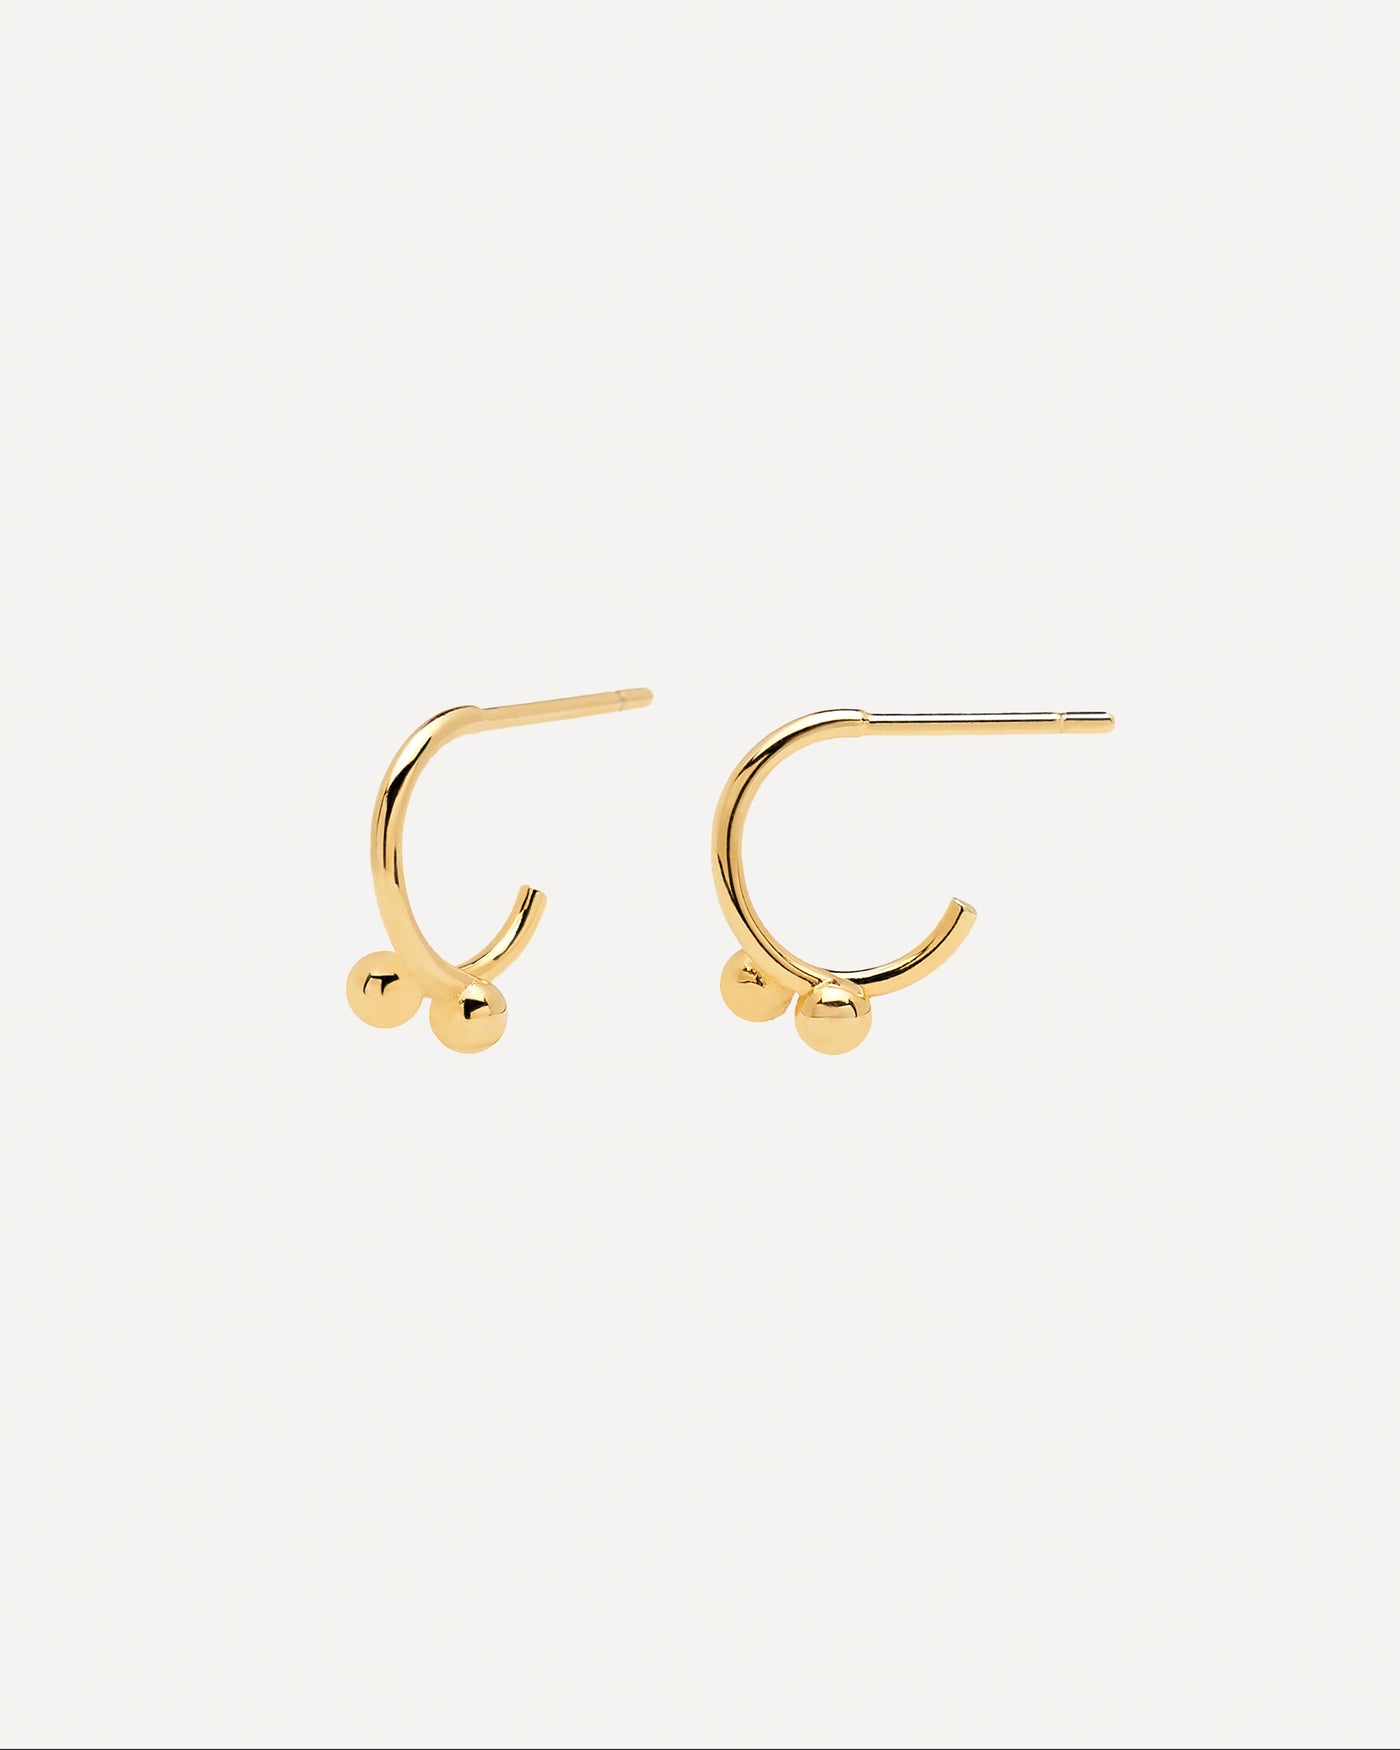 2023 Selection | Aura Gold earrings. Get the latest arrival from PDPAOLA. Place your order safely and get this Best Seller. Free Shipping over 40€